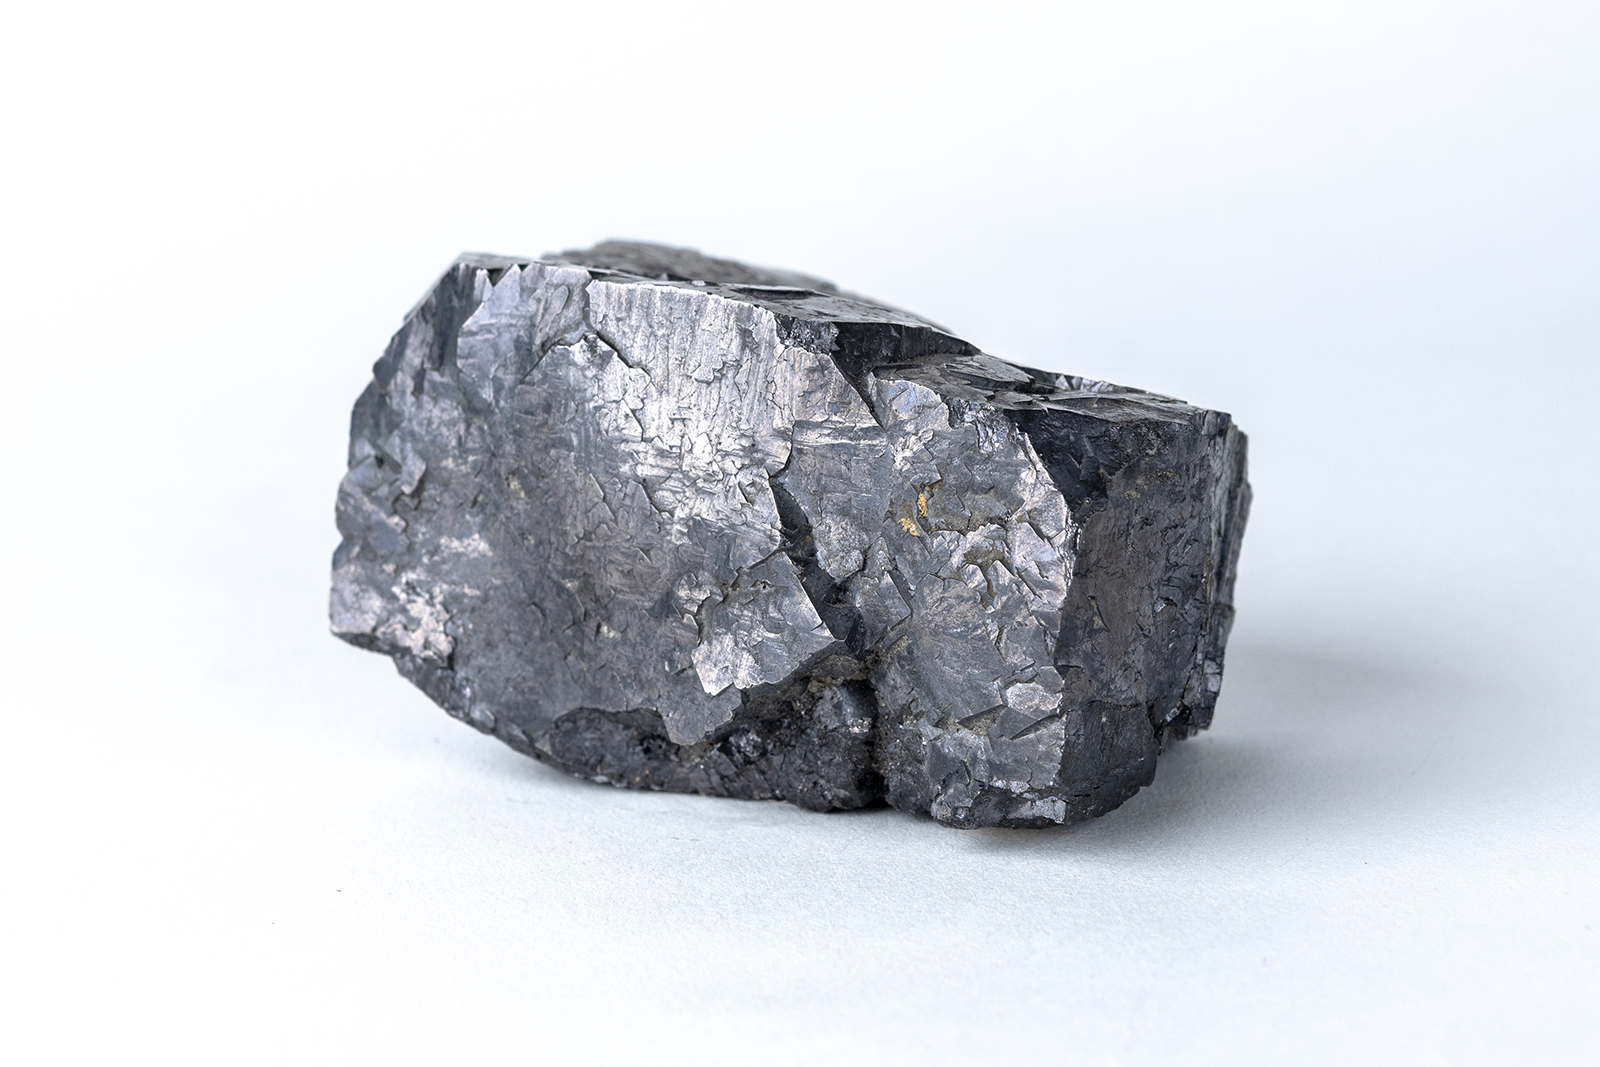 Crystals of galena, the main ore of lead from the mines at Leadhills